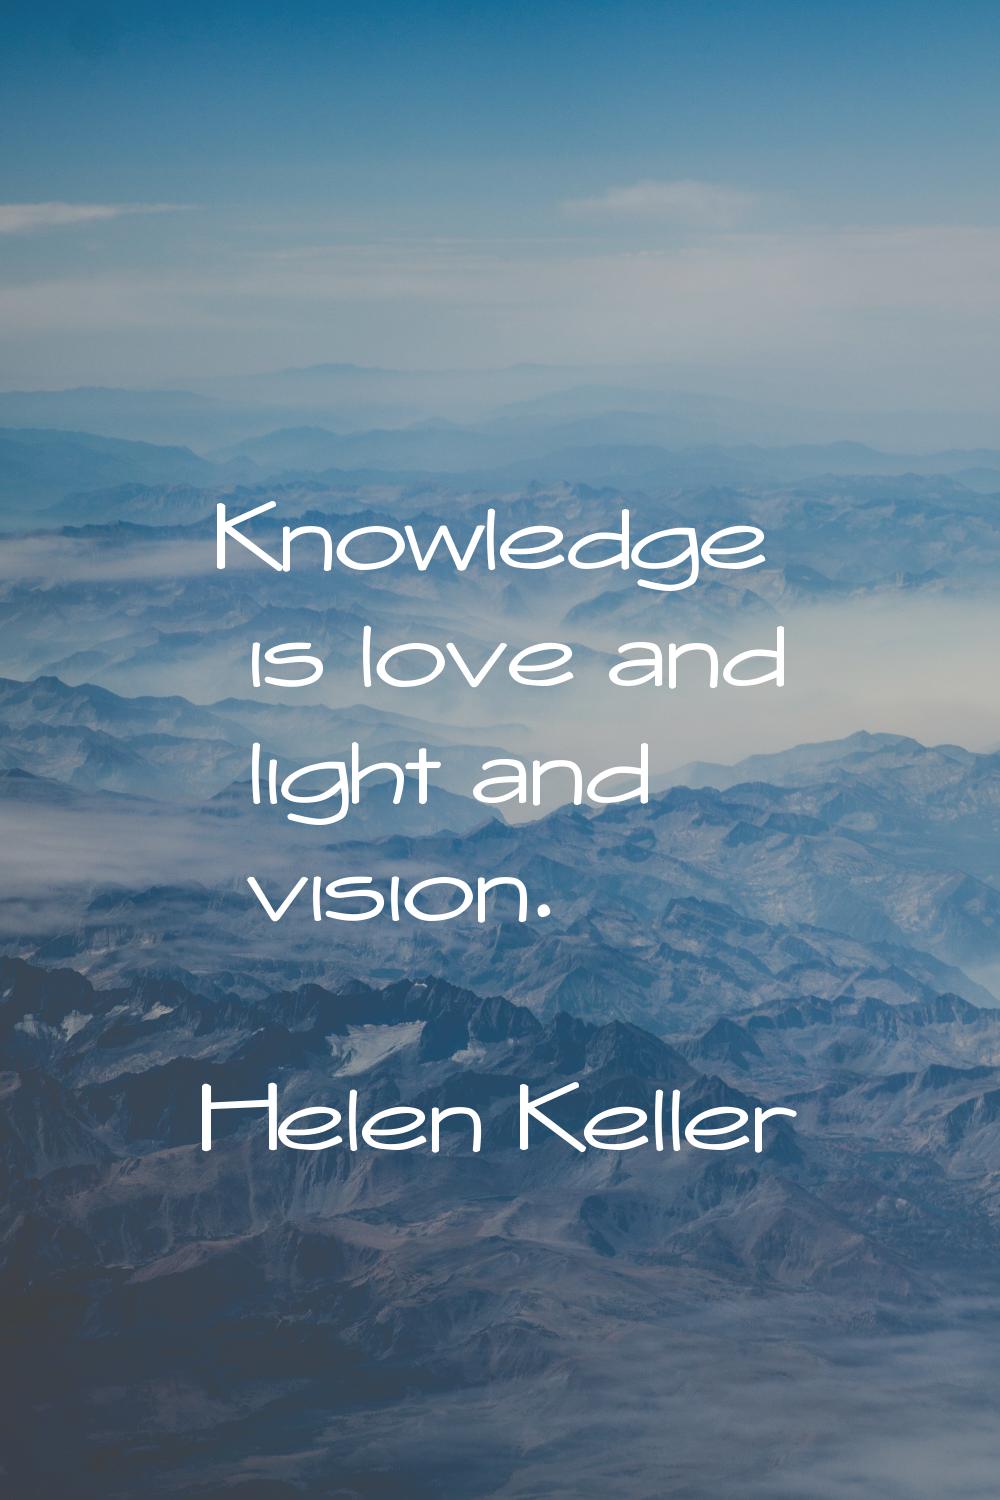 Knowledge is love and light and vision.